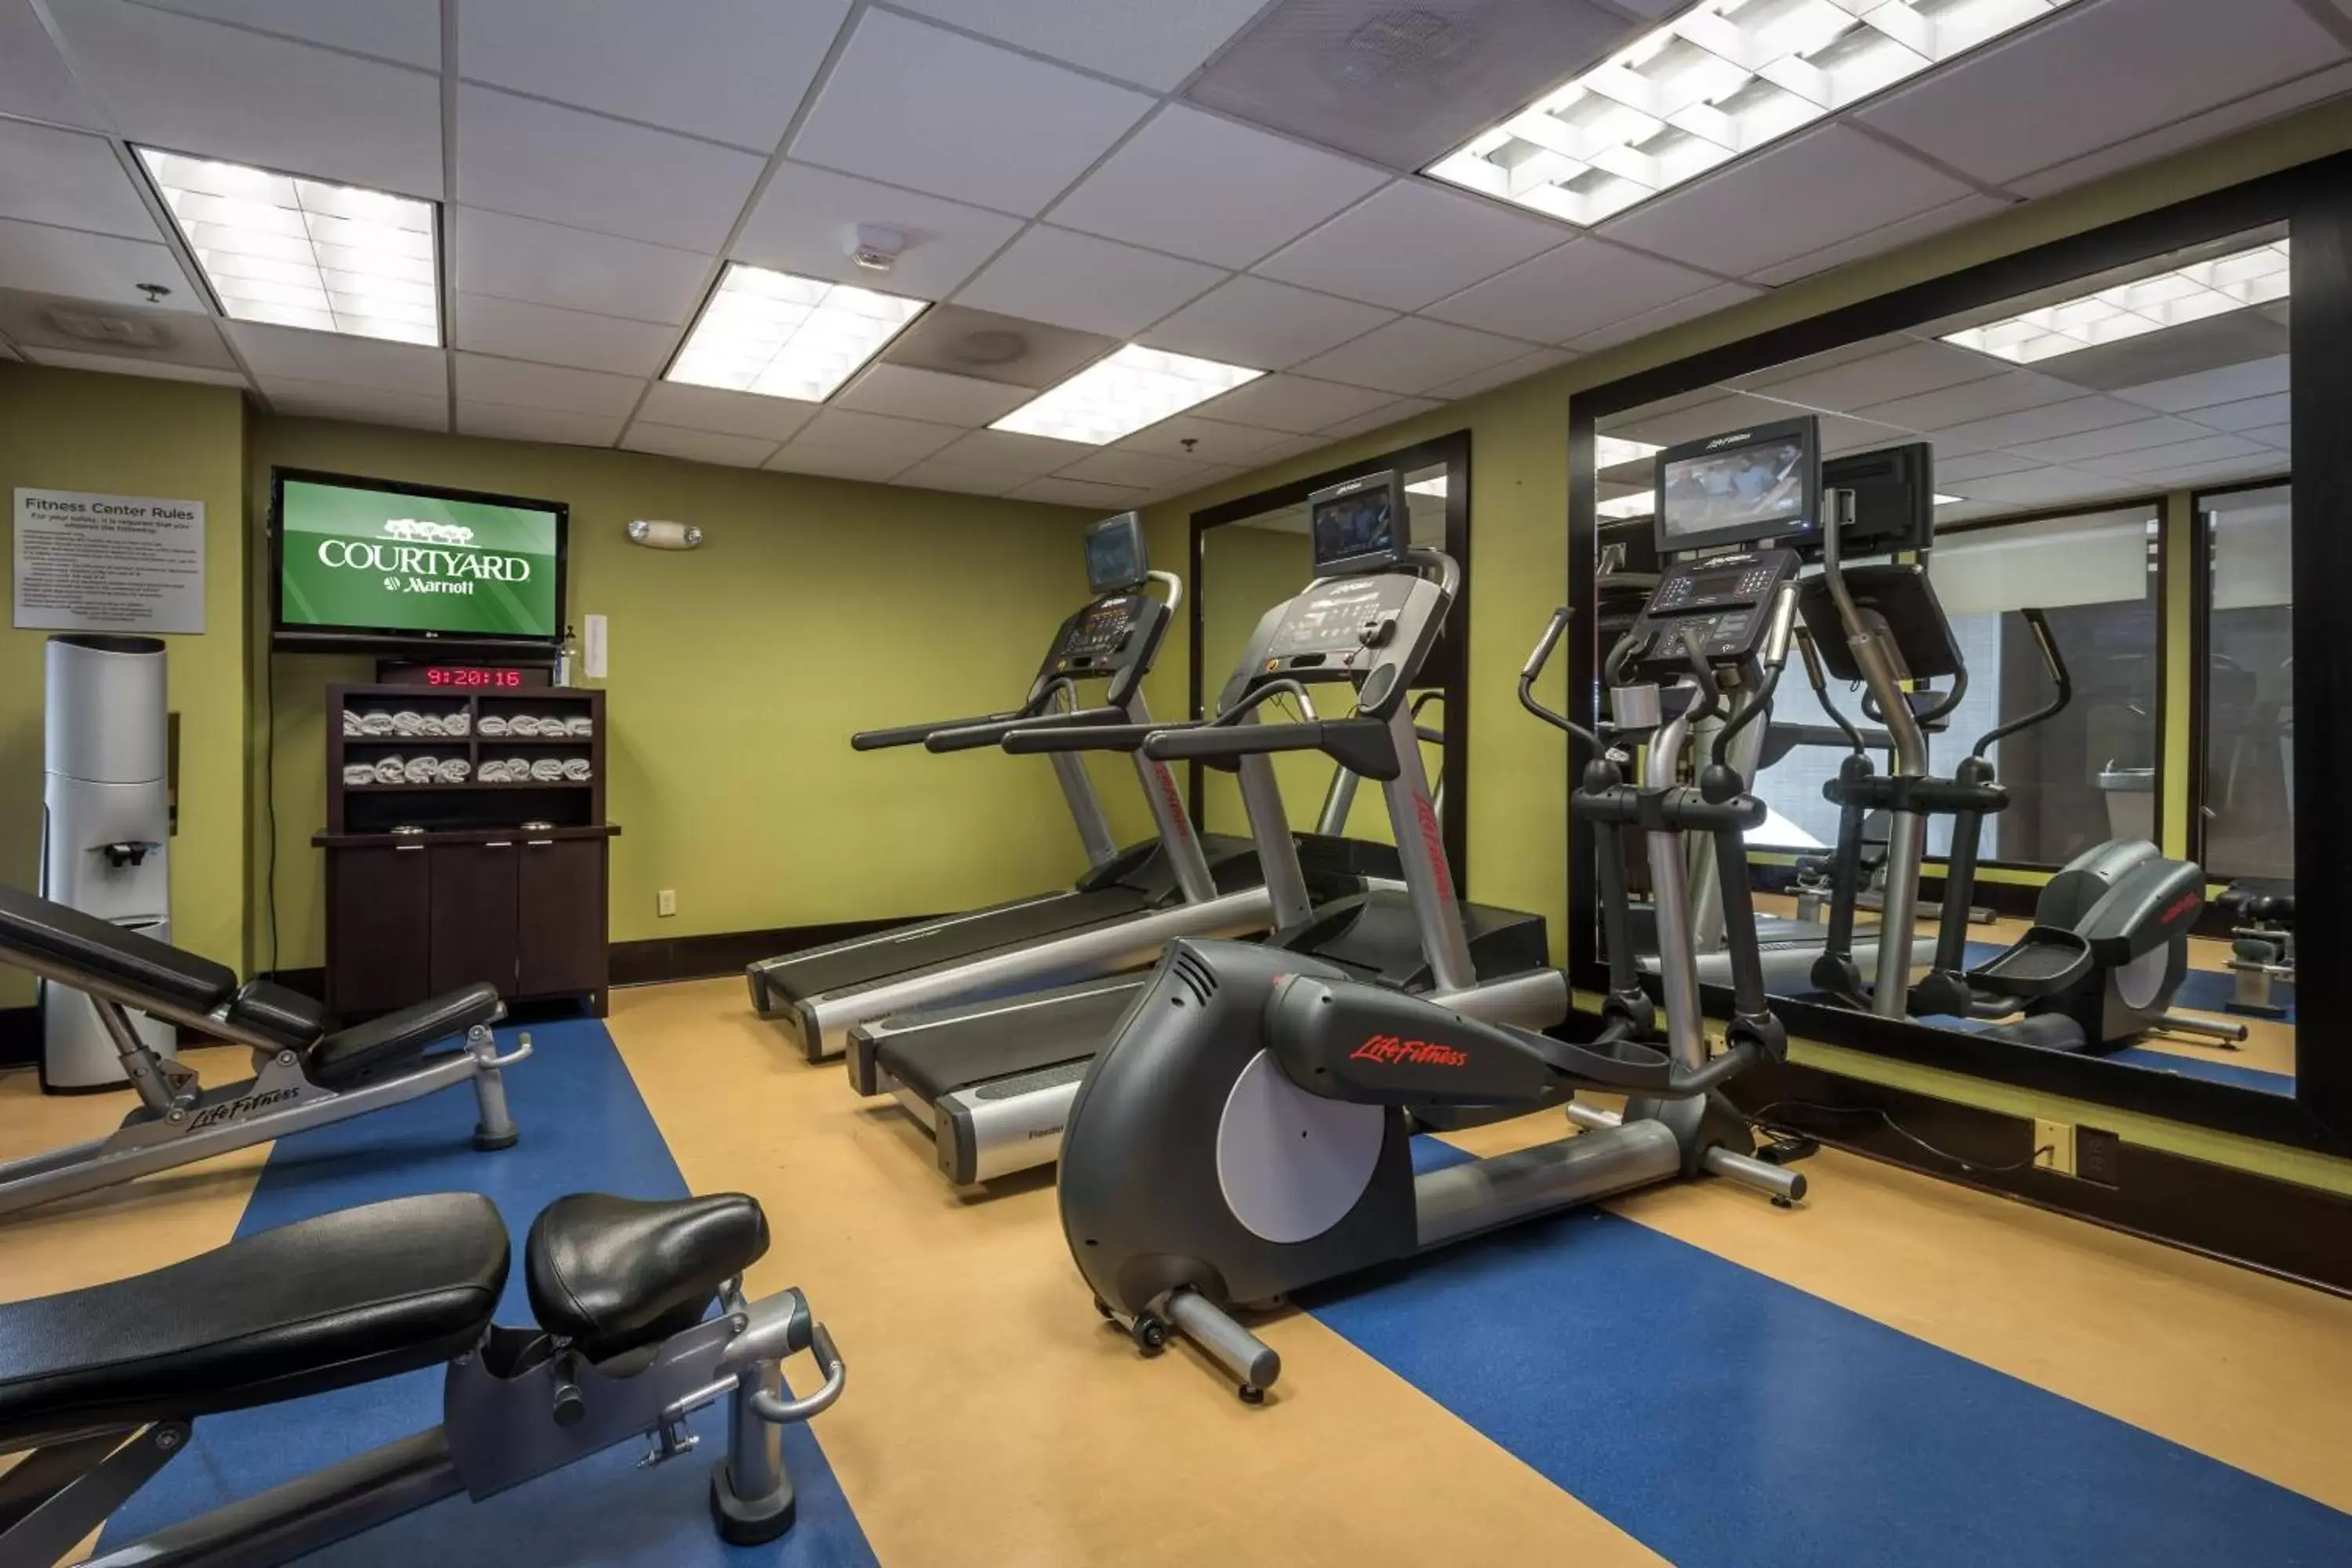 Fitness centre/facilities, Fitness Center/Facilities in Courtyard Tupelo